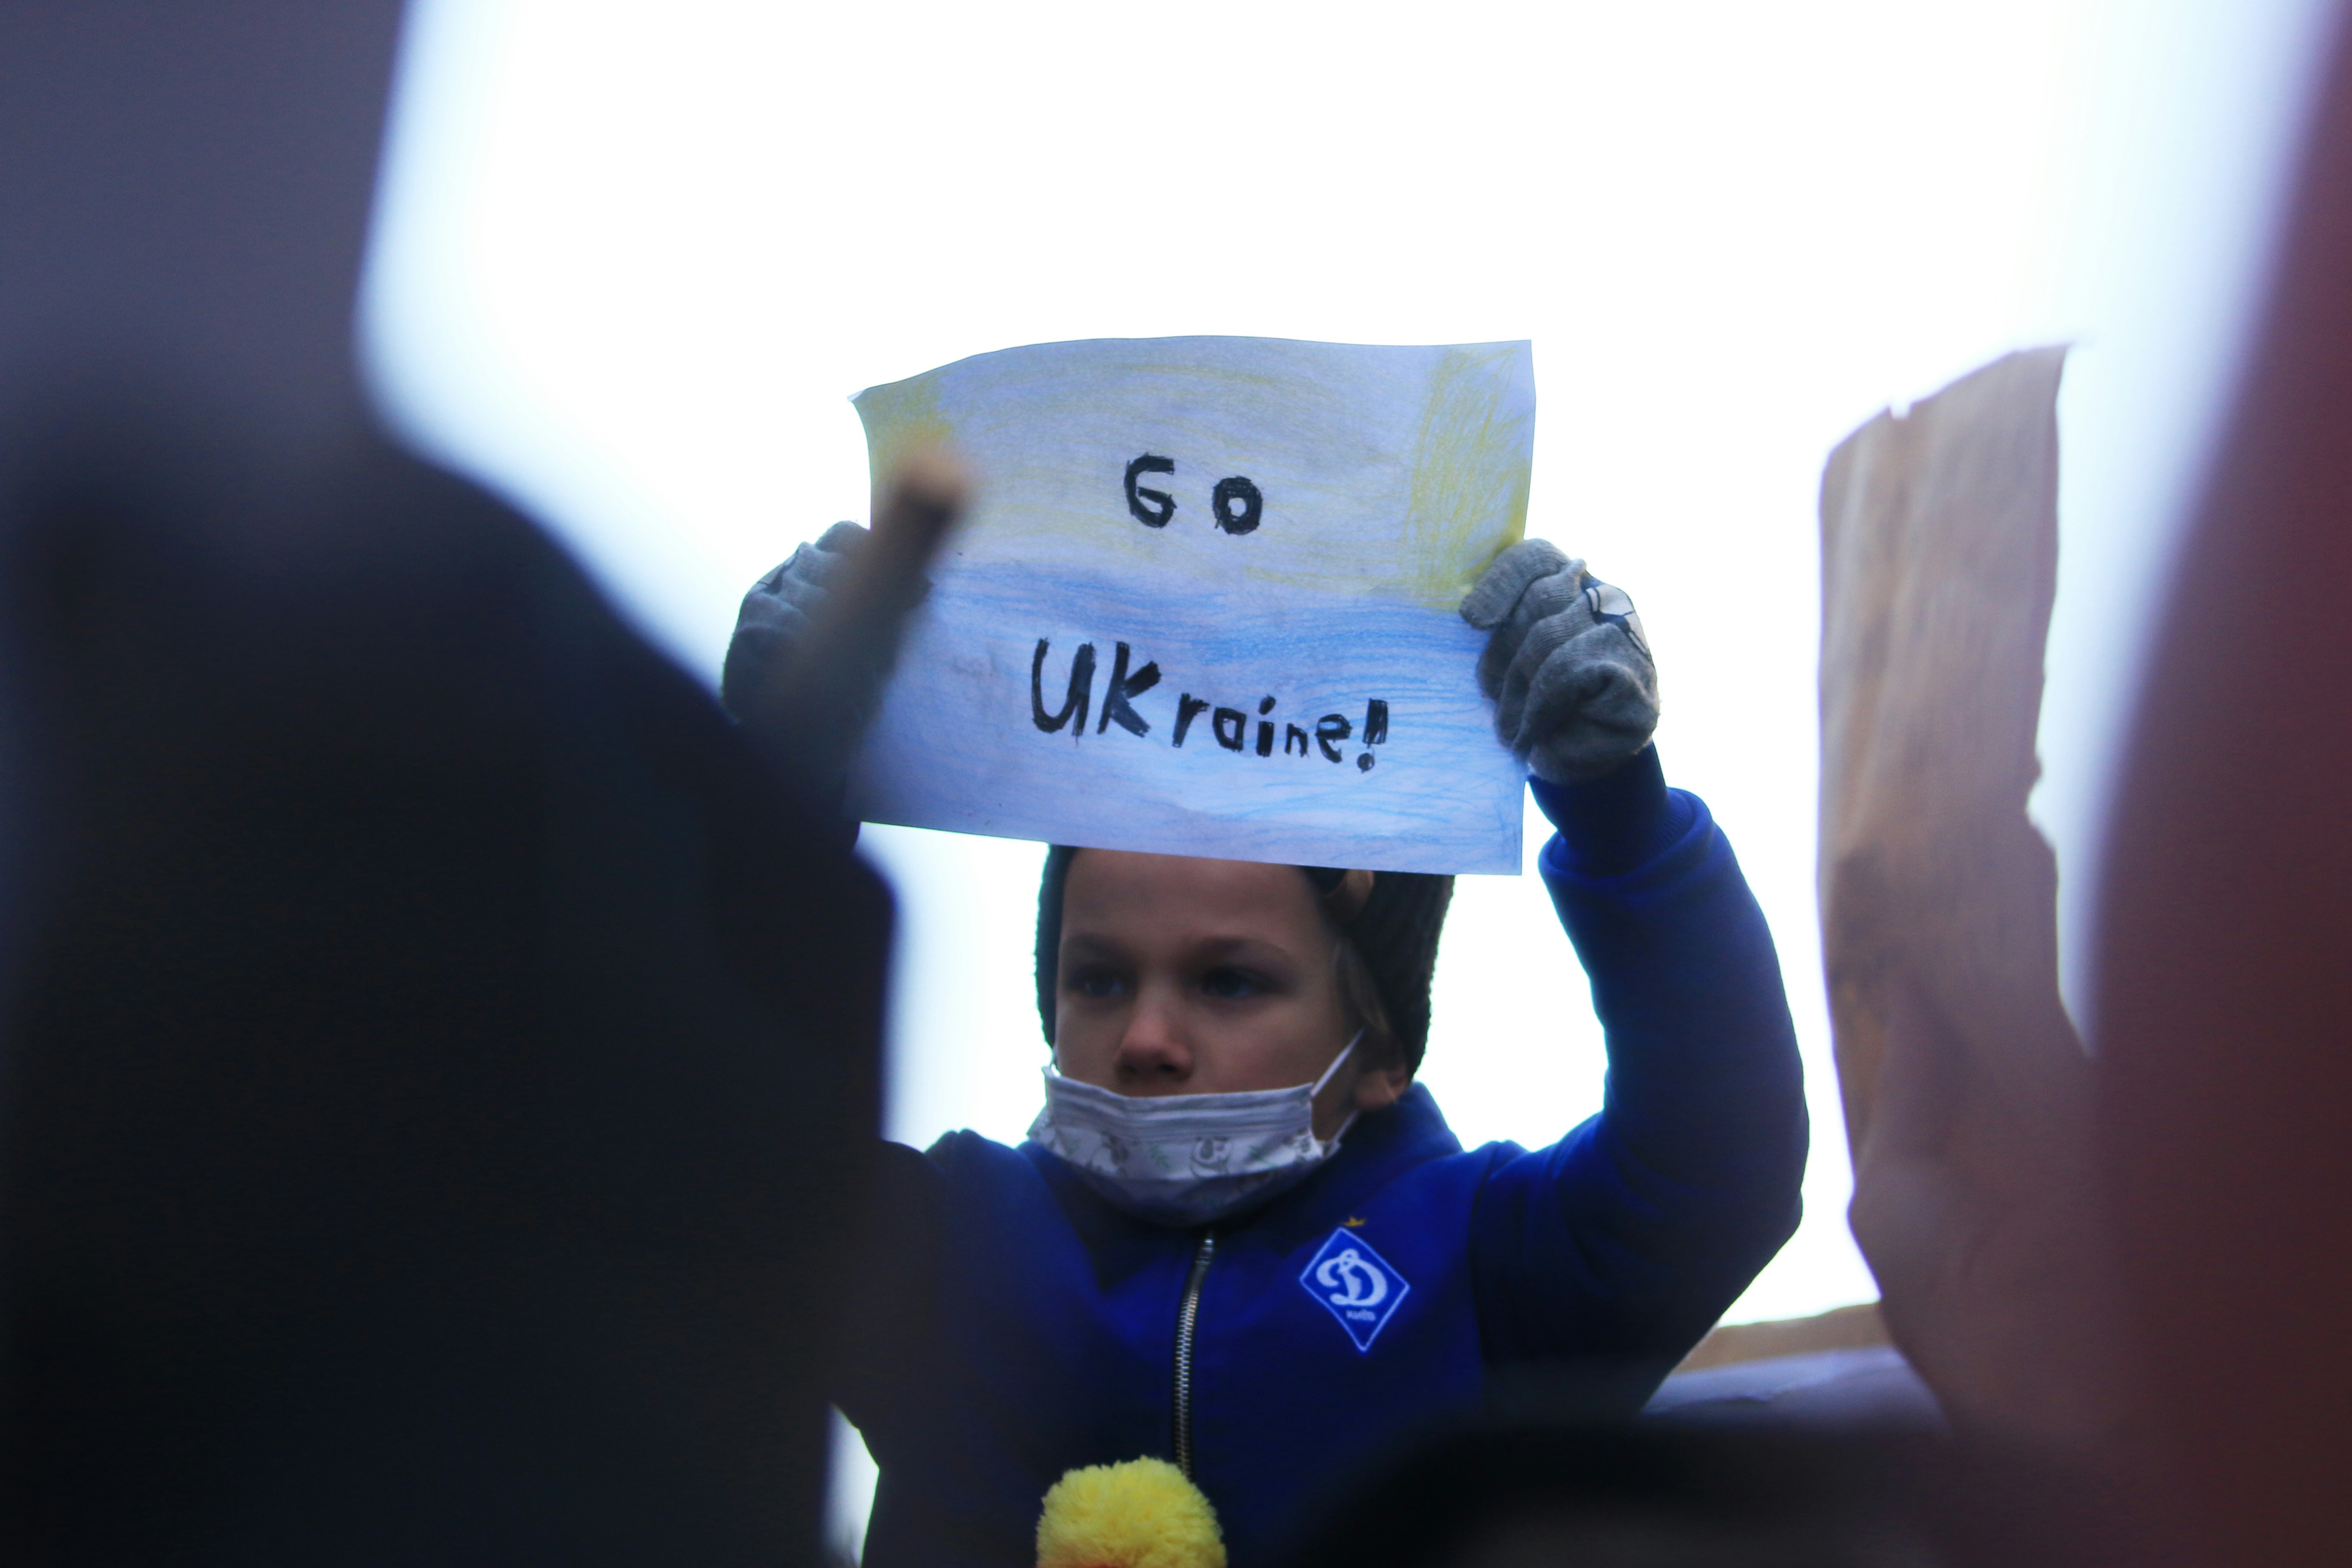 Sunday, February 27, 2022, Protesters gathered outside of Russian Consulate in uptown New York City to protest Russian's invasion in Ukraine. A child holding a sign reads "go Ukrain".